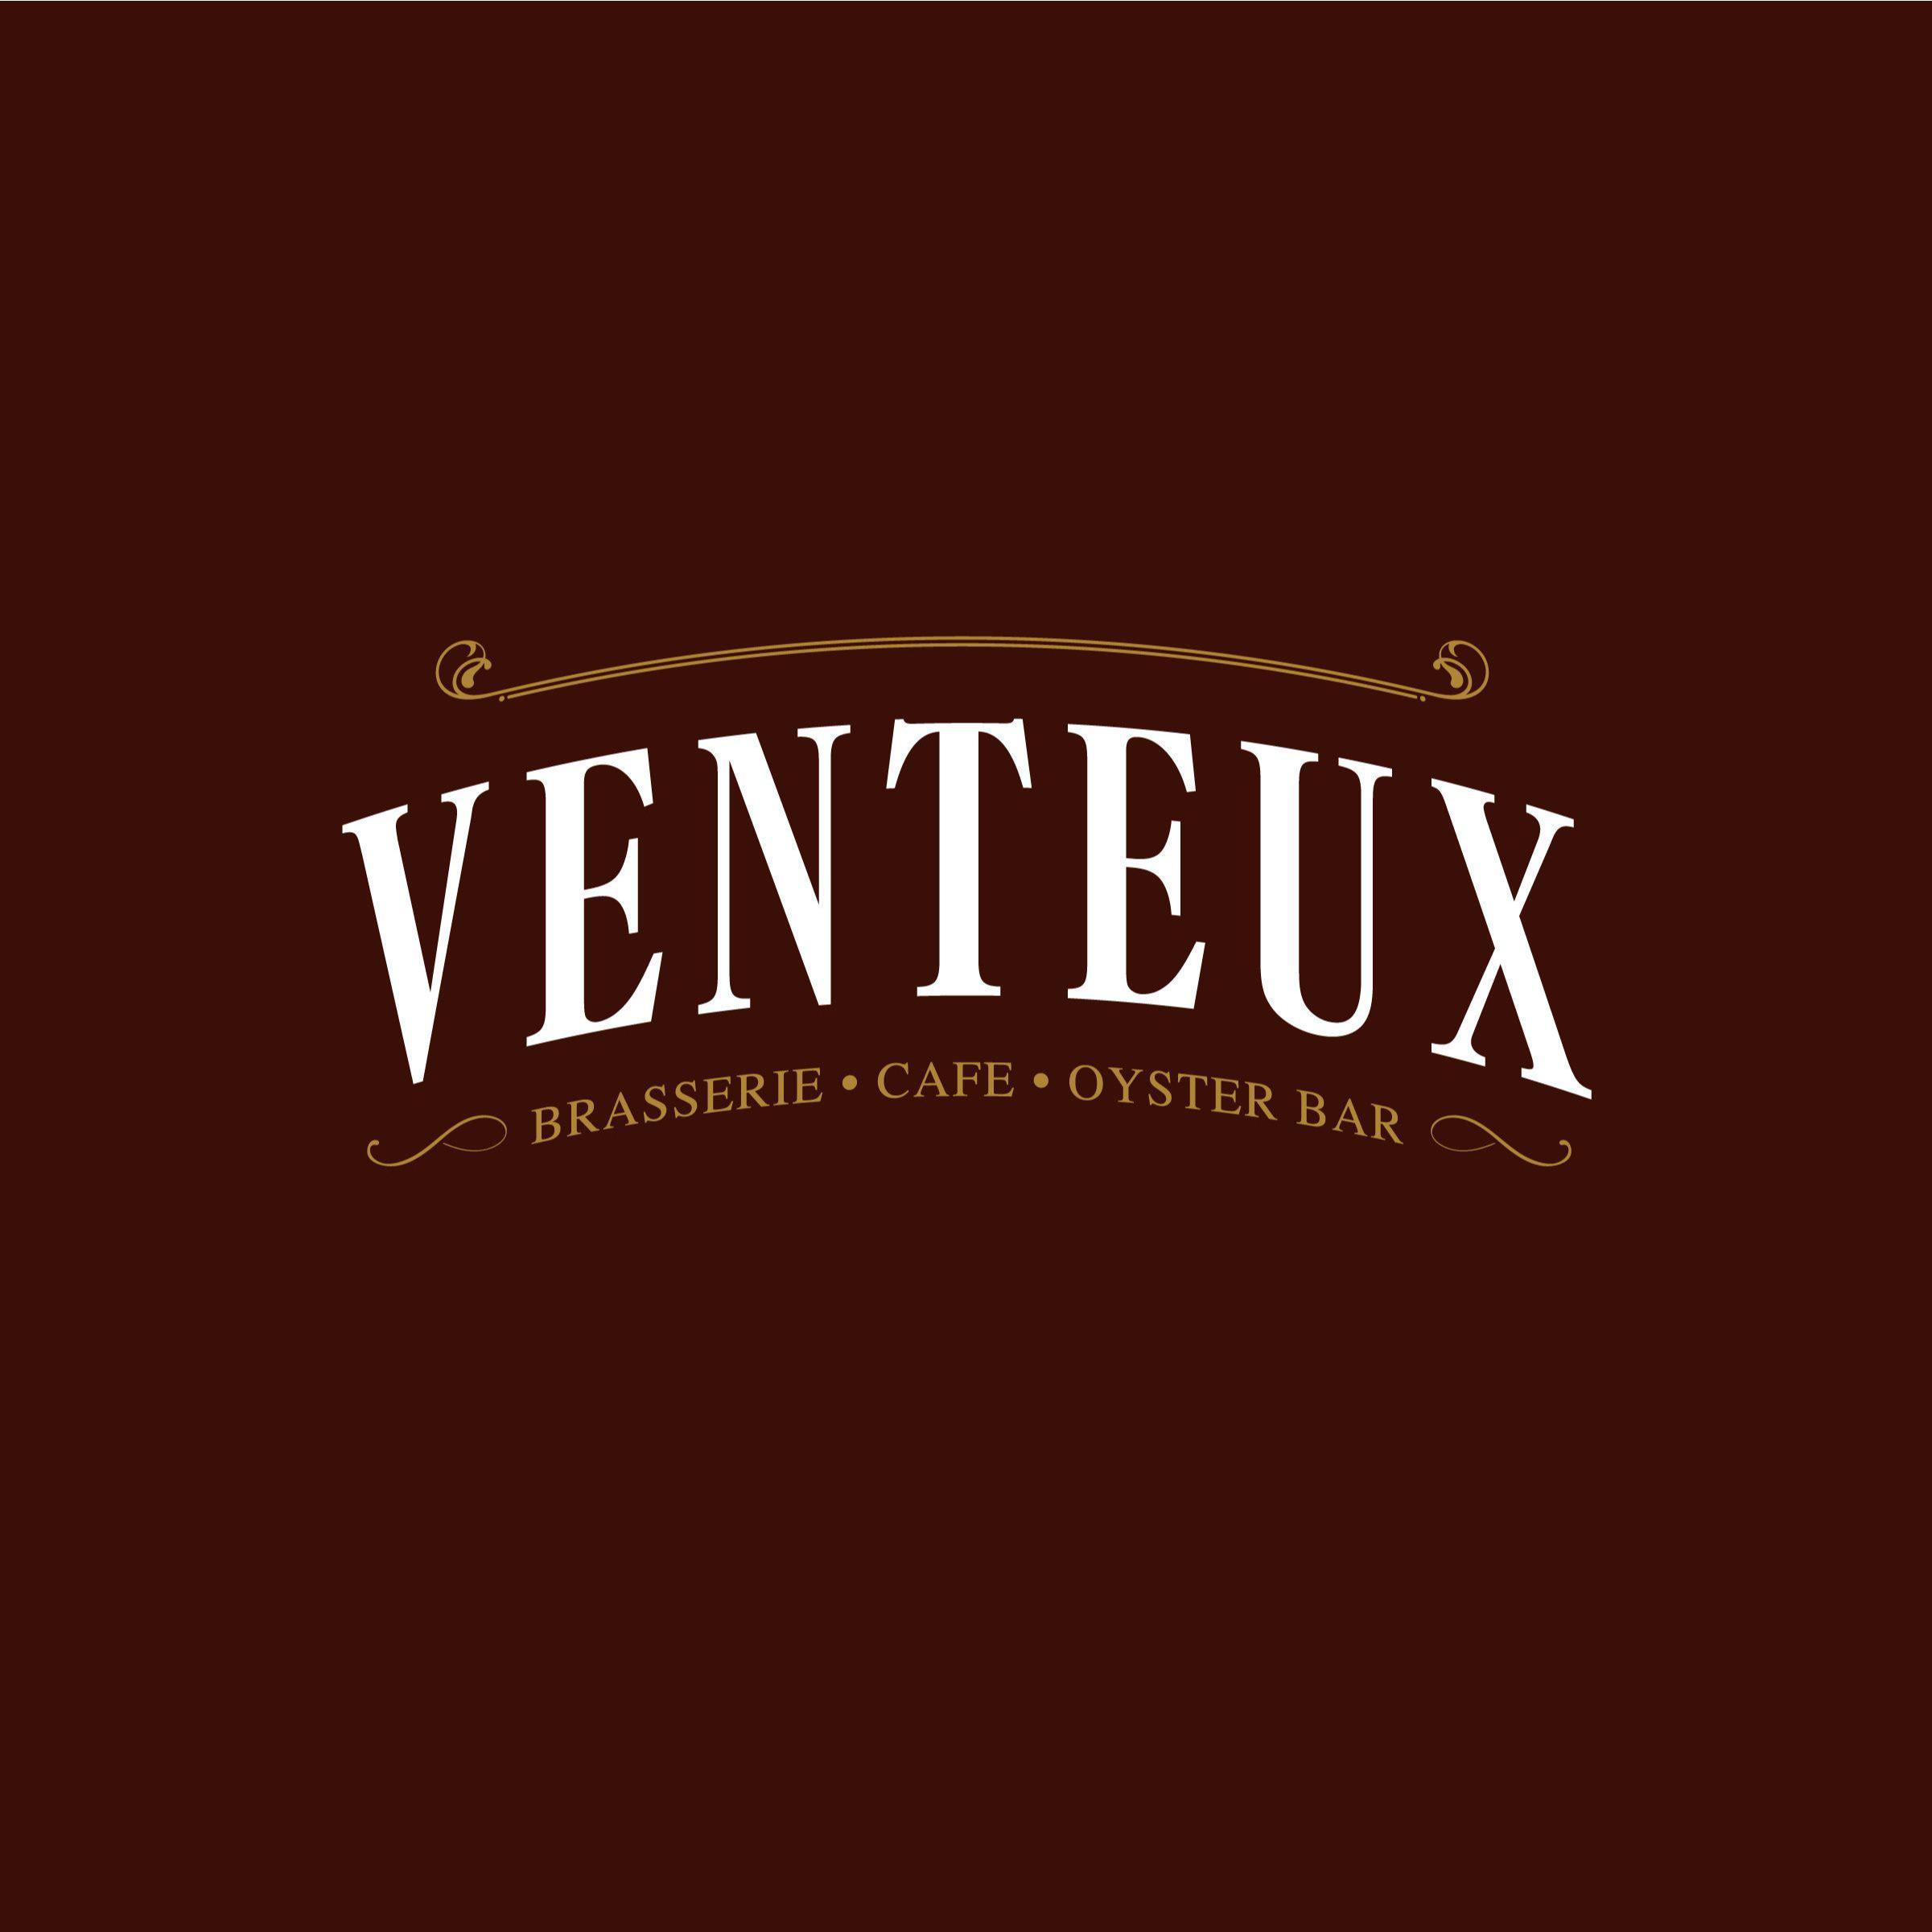 Venteux Brasserie, Cafe & Oyster Bar - Chicago, IL 60601 - (312)777-9003 | ShowMeLocal.com